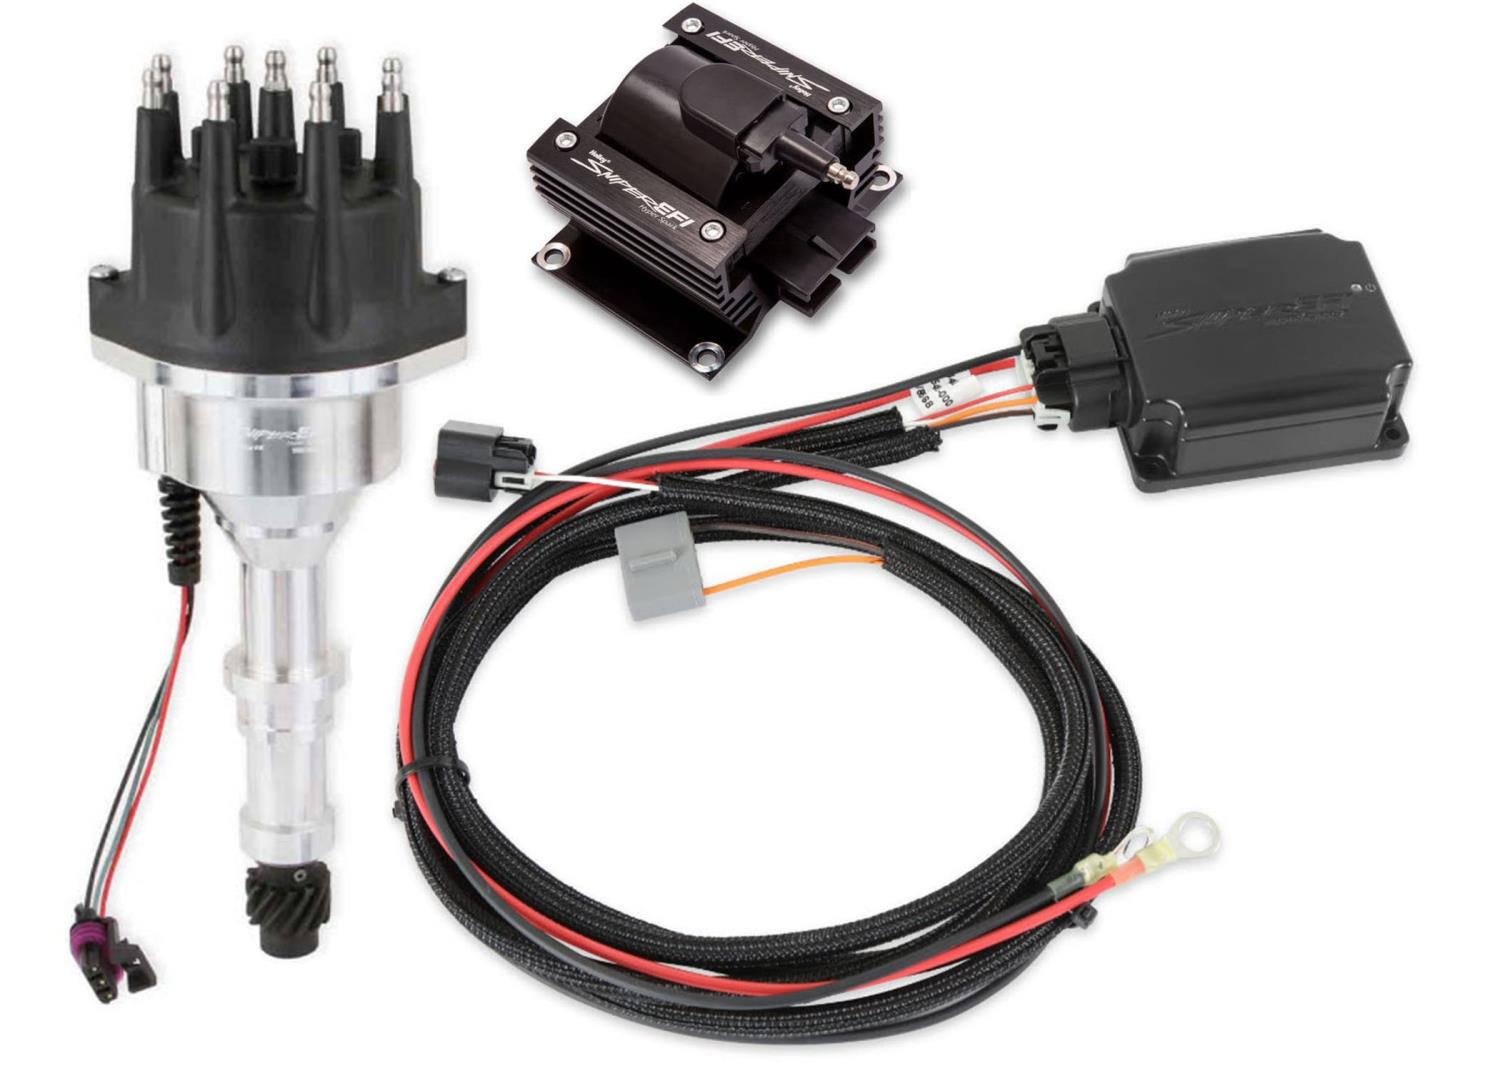 565-312 Sniper EFI HyperSpark Distributor Kit for Buick 400, 430, 455 ci. Engines (w/HyperSpark II Ignition Box)